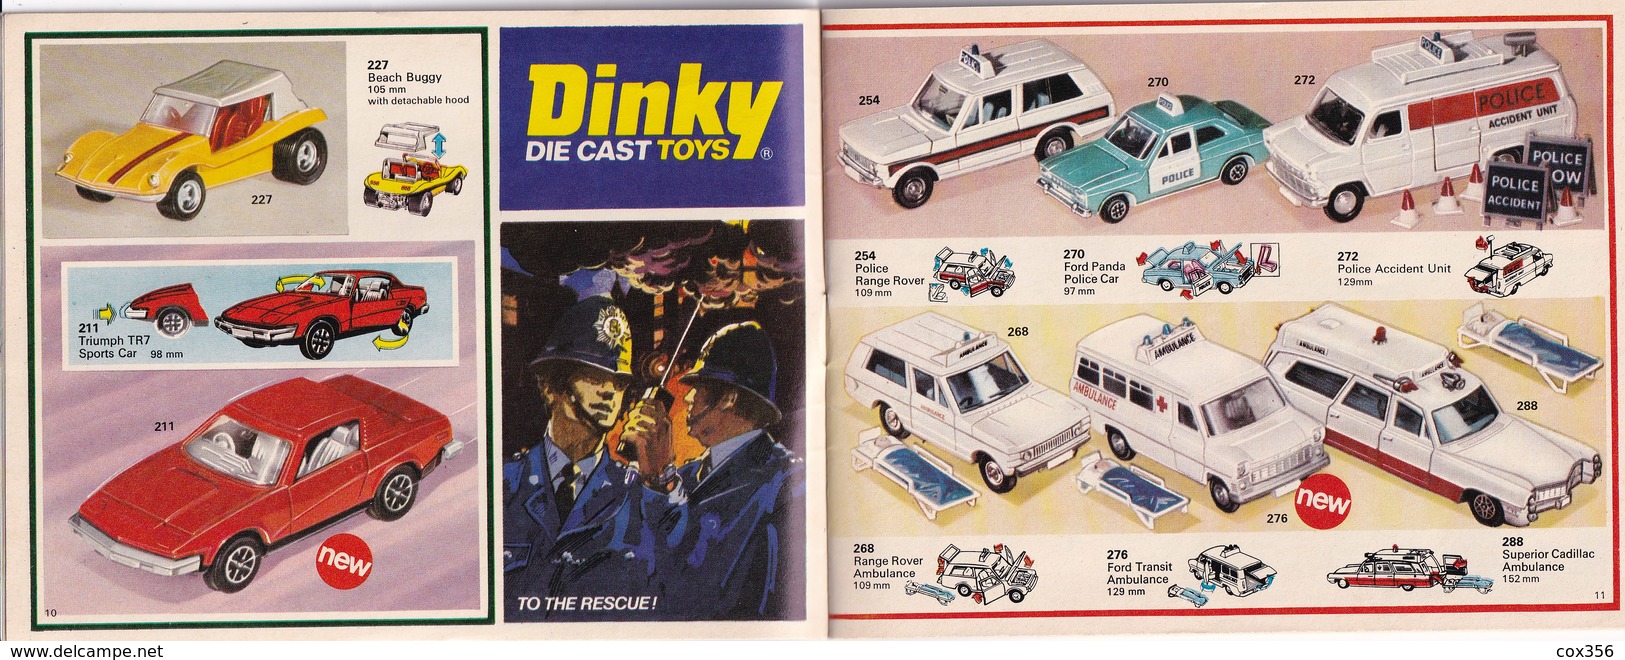 DINKY TOYS CATALOGUE DINKY DIE CAST TOYS N 12 - Crafts